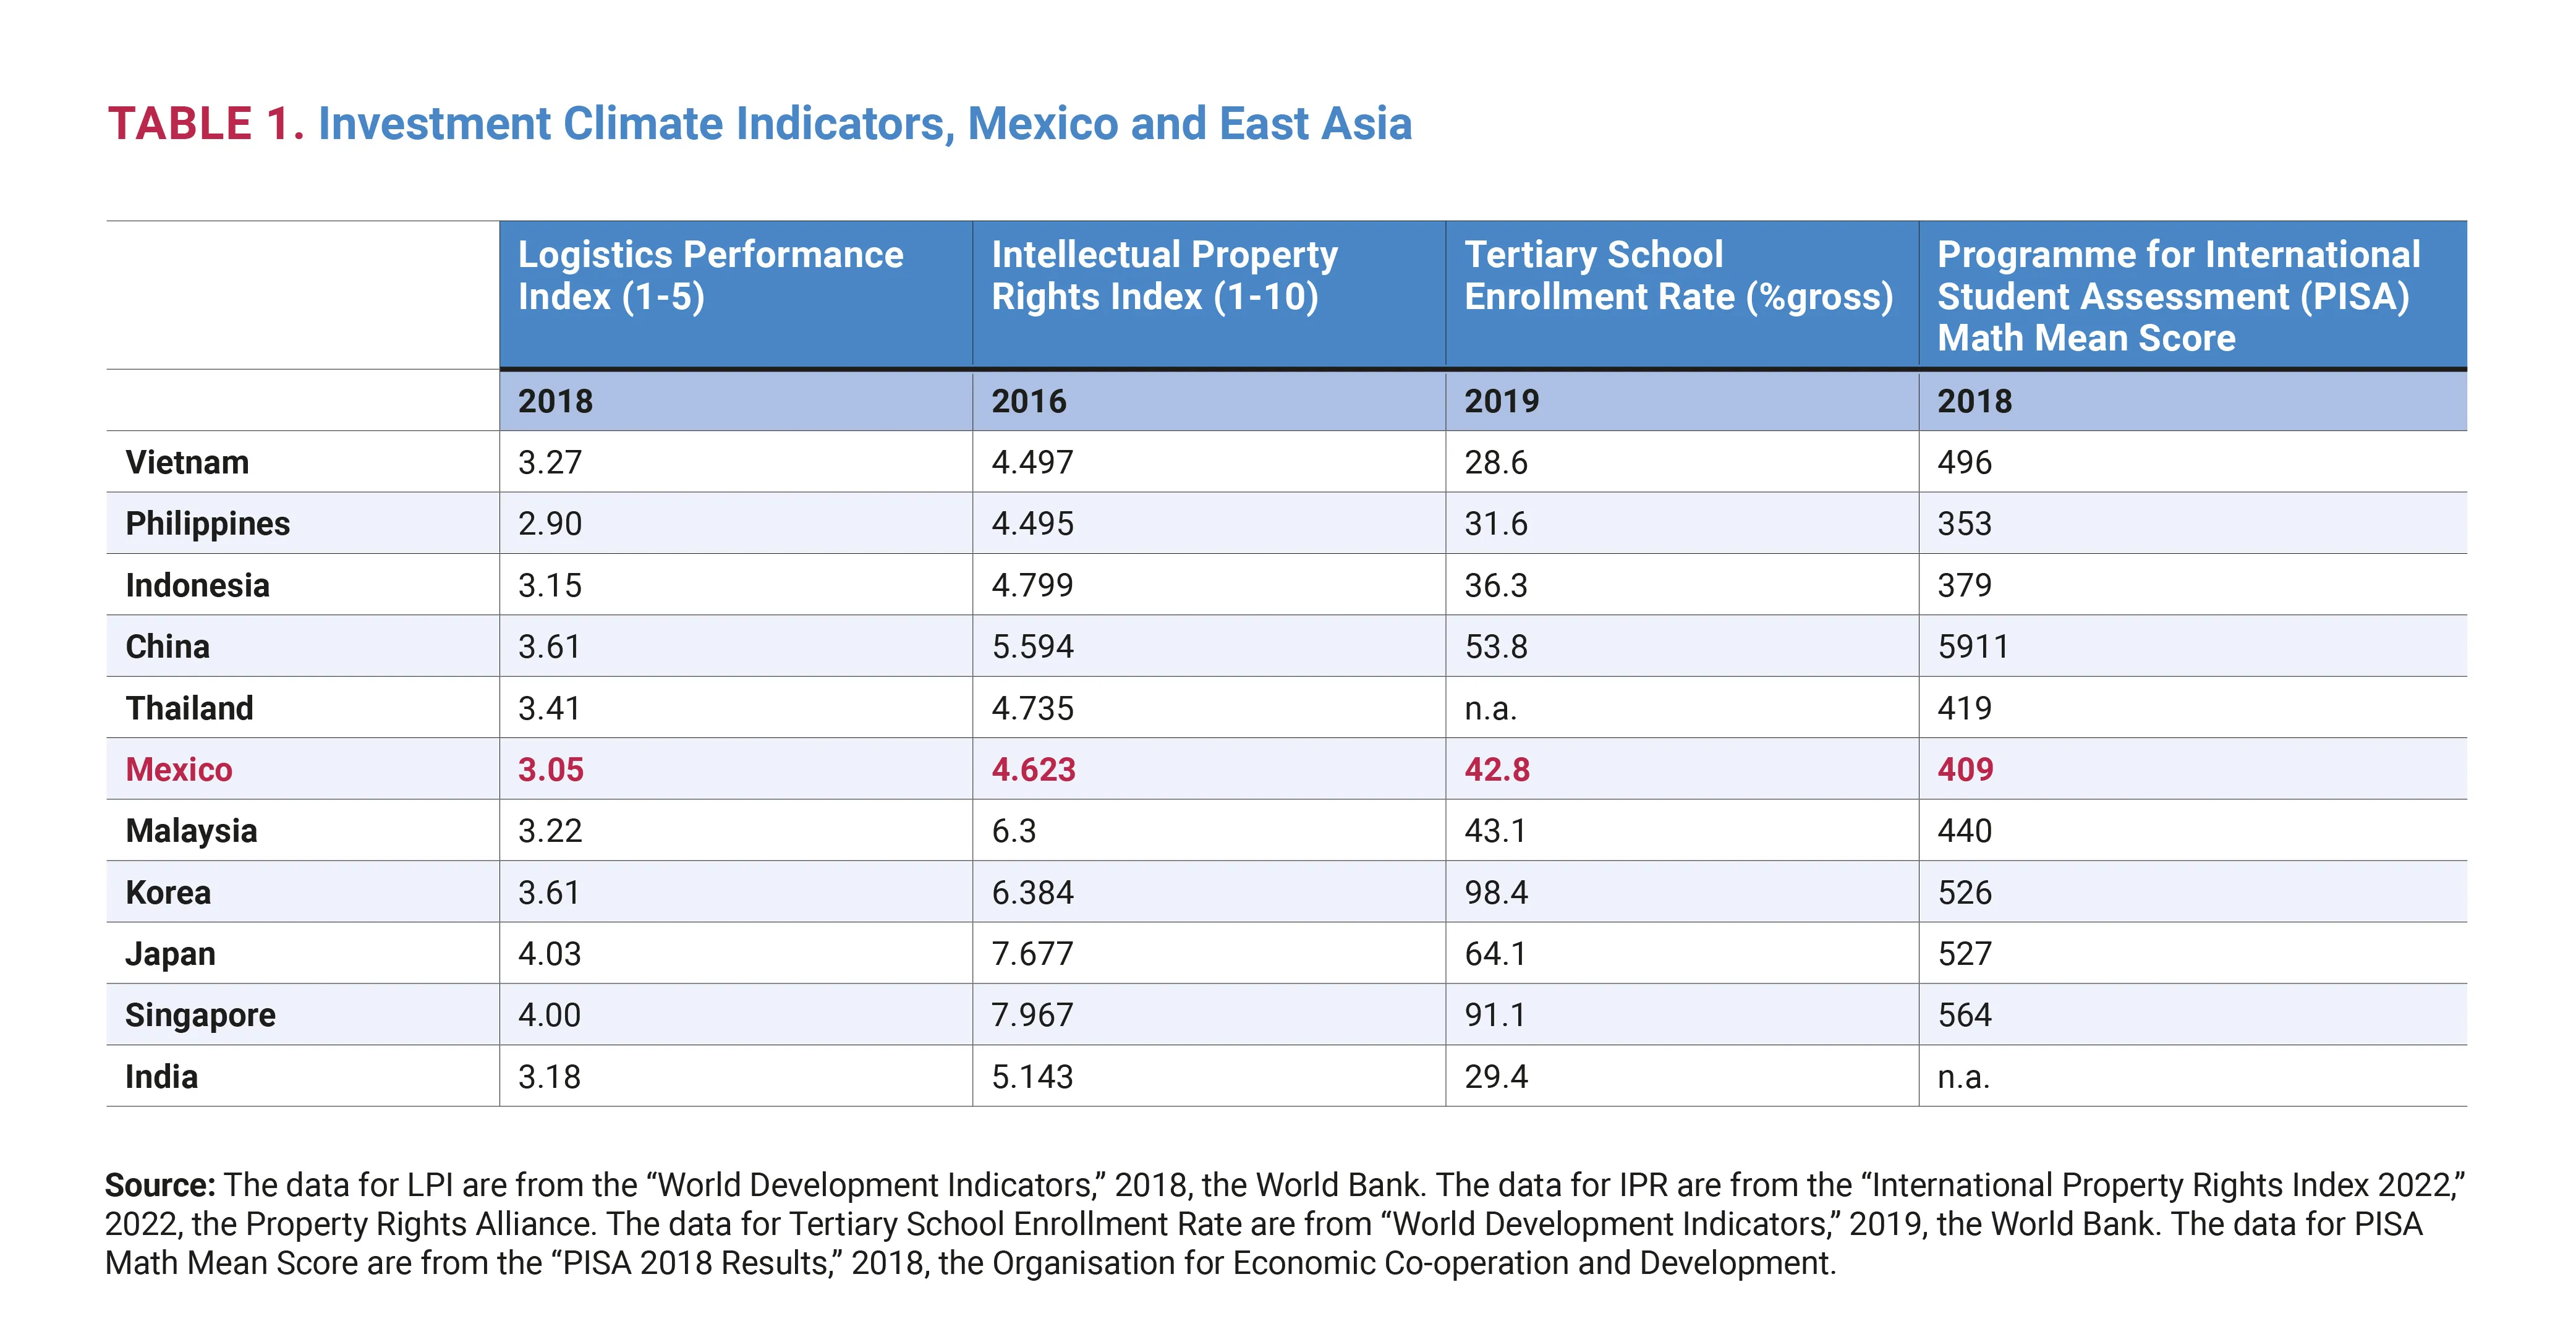 Investment Climate Indicators, Mexico and East Asia